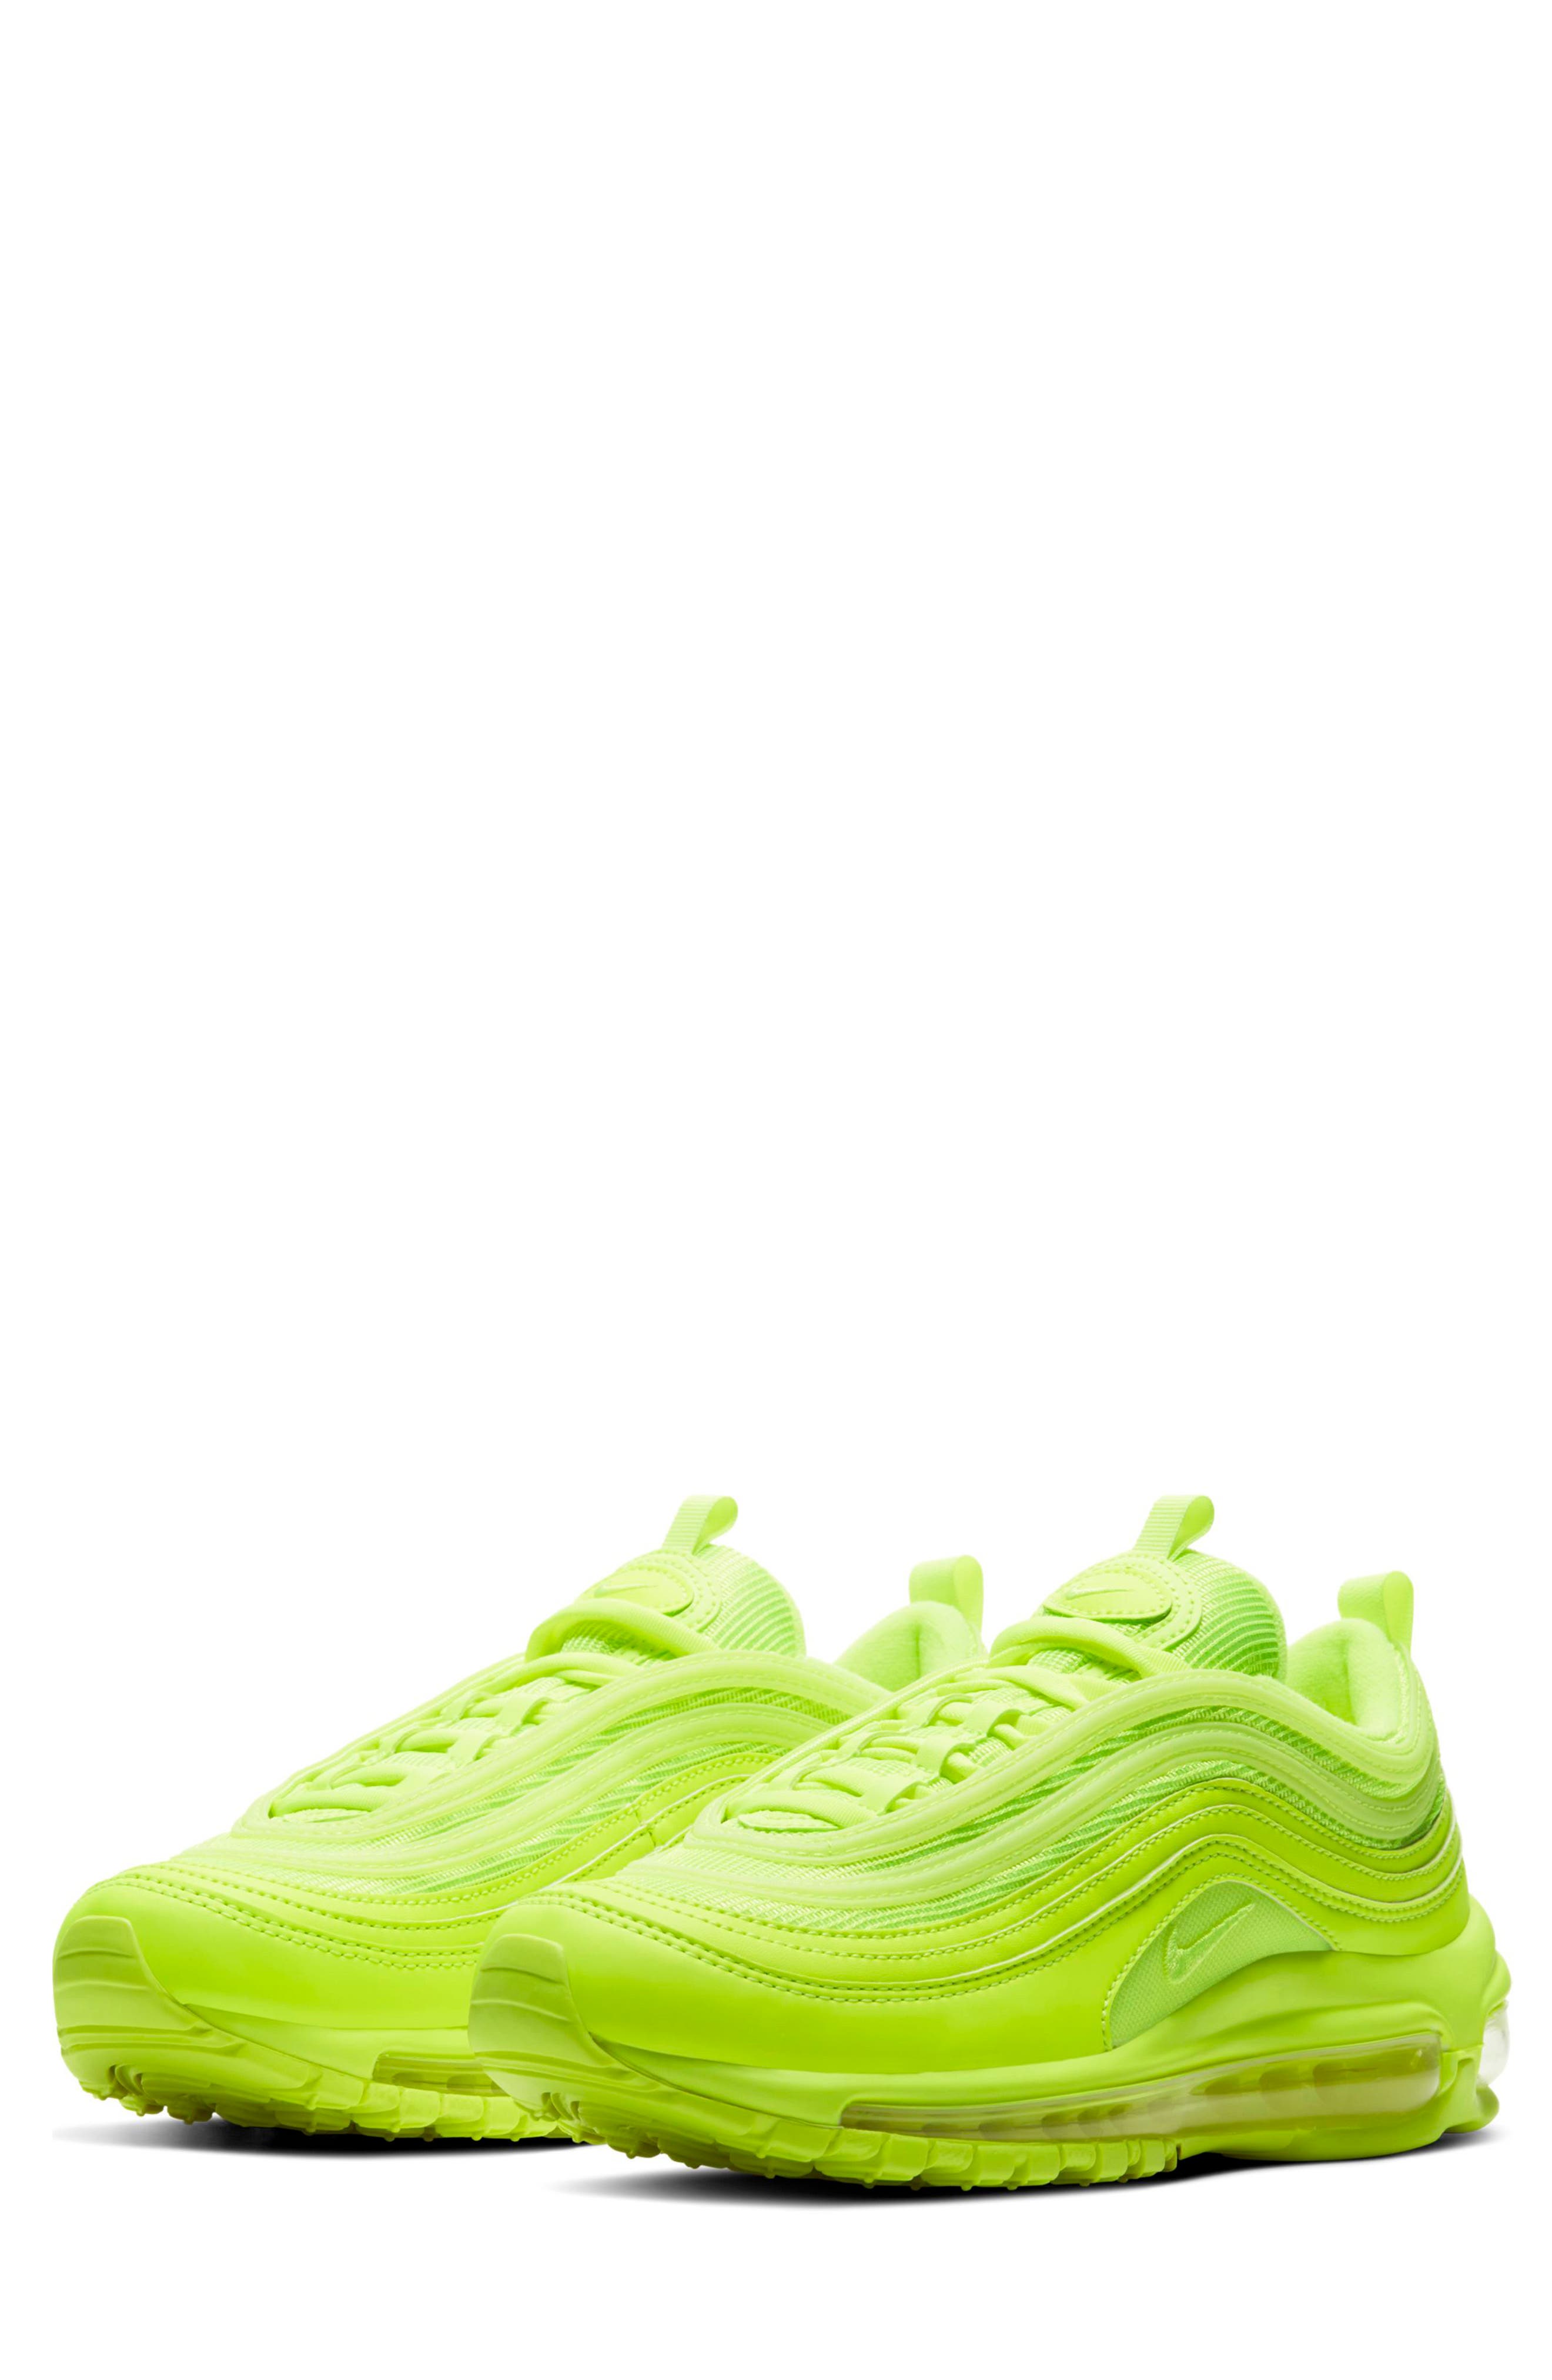 UPC 194274400625 product image for Women's Nike Air Max 97 Sneaker, Size 5.5 M - Yellow | upcitemdb.com